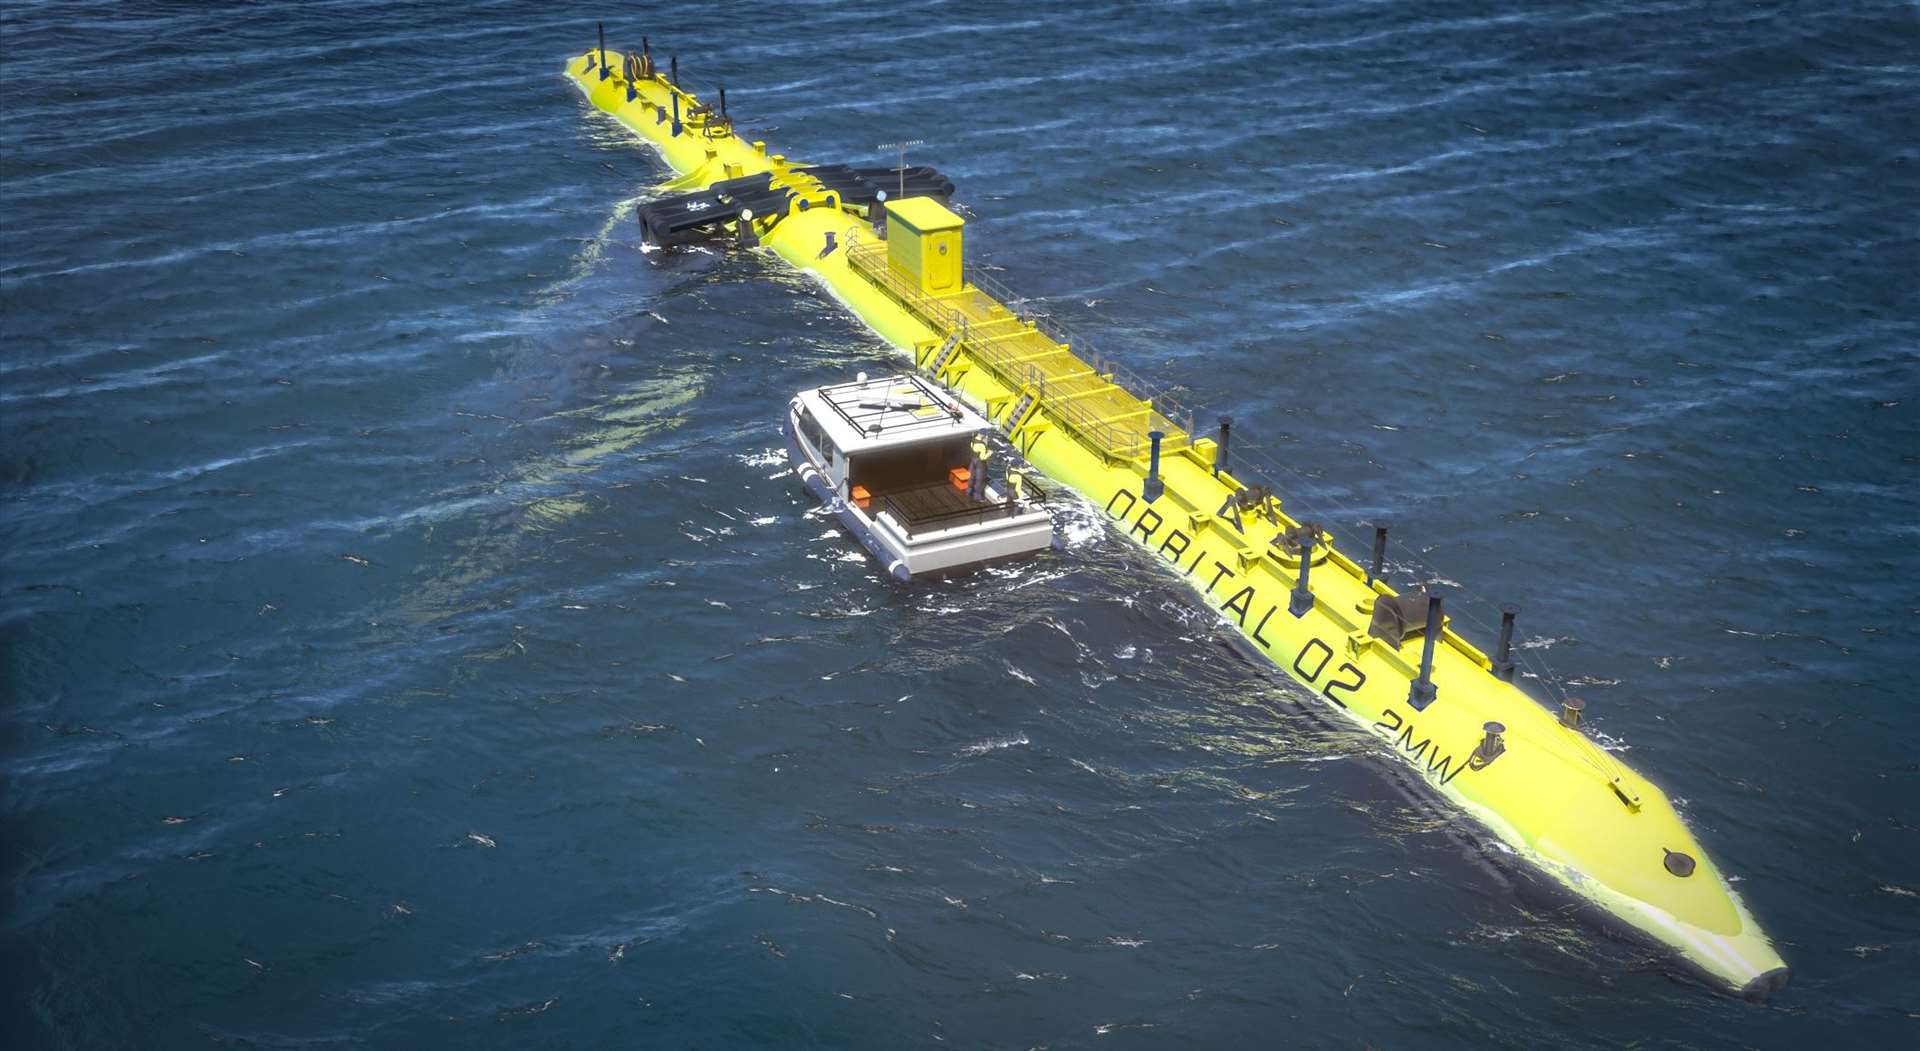 The Orbital O2 2MW tidal turbine will become the world's most powerful when it goes into operation at EMEC next year.